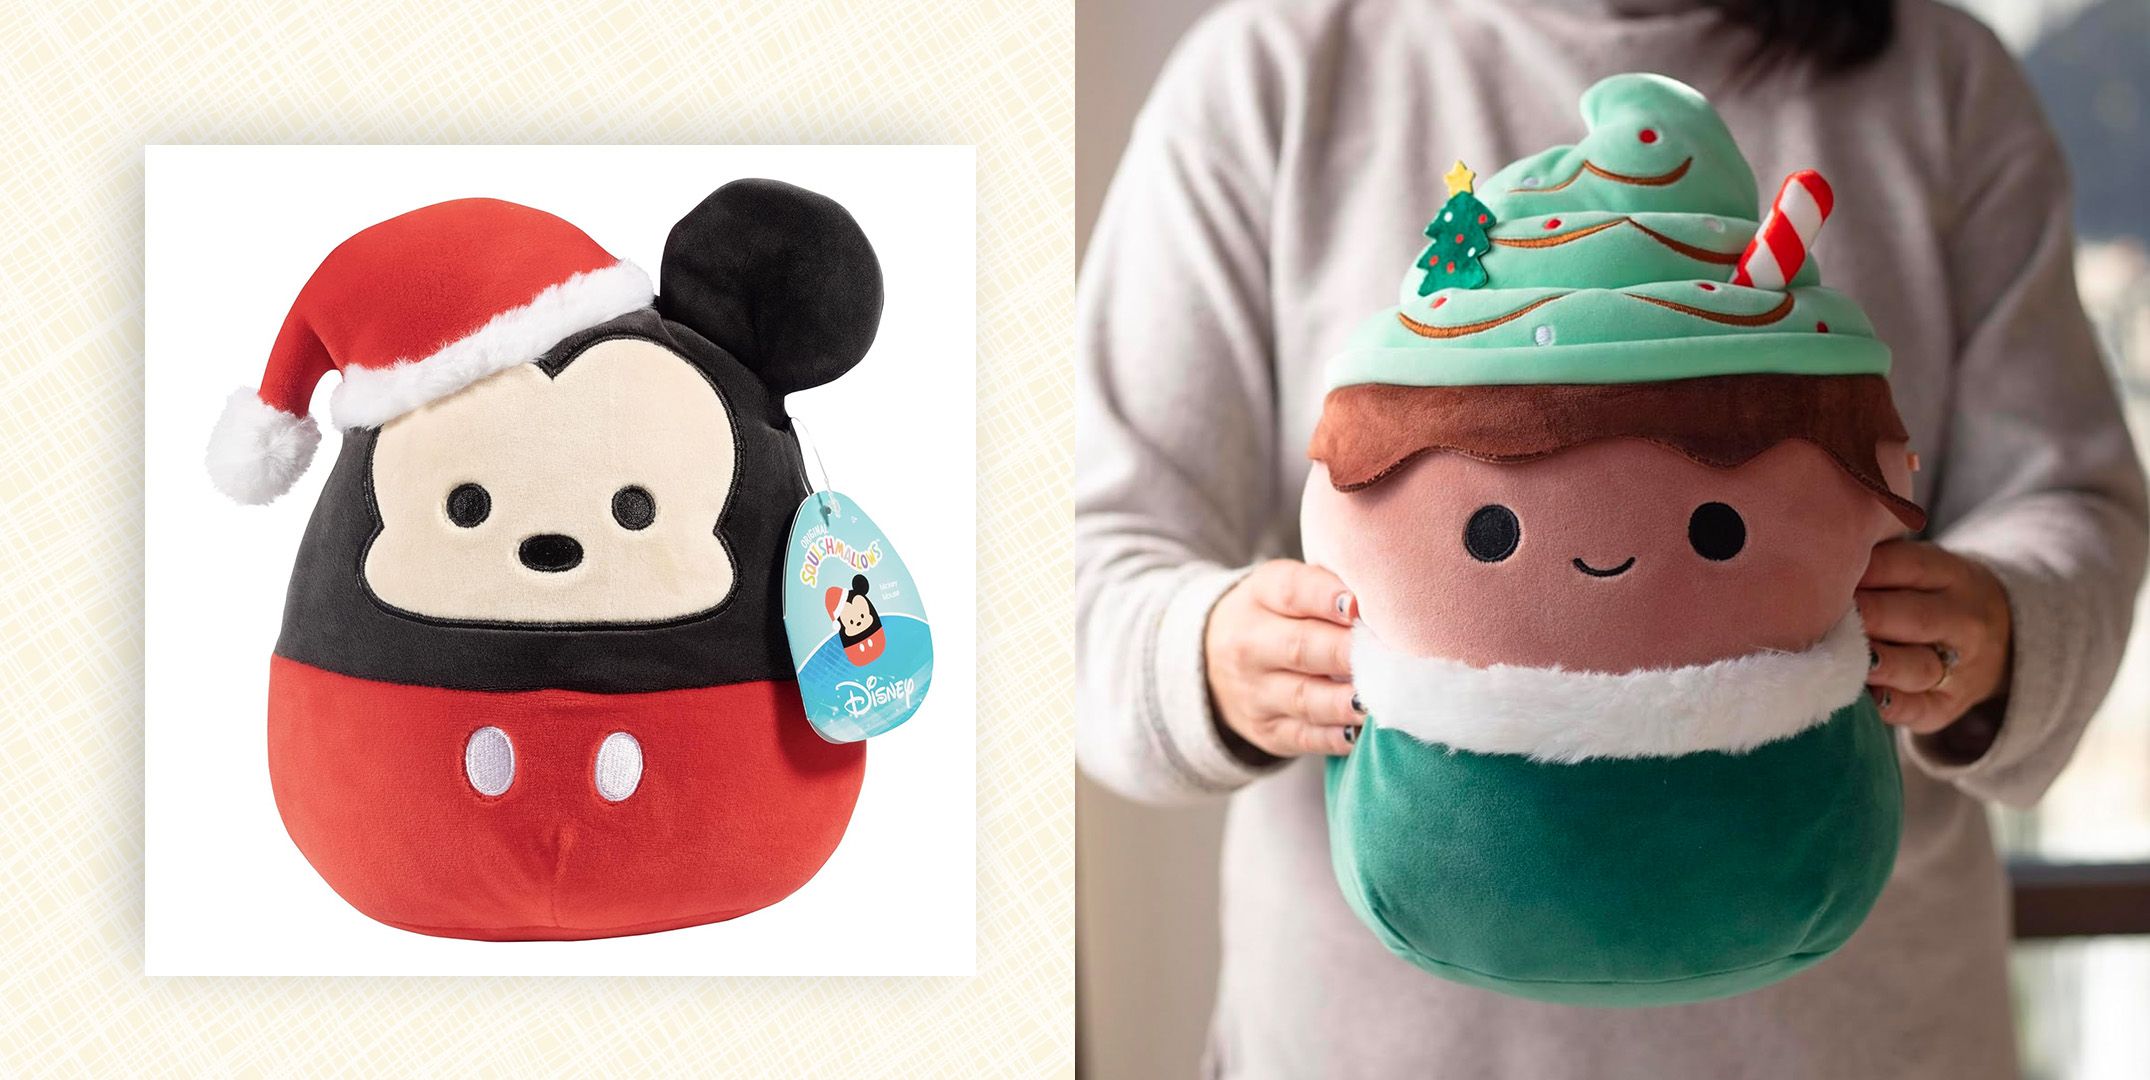 Customer Reviews: Squishmallows Stitch & Angel Plush Pair, 8in